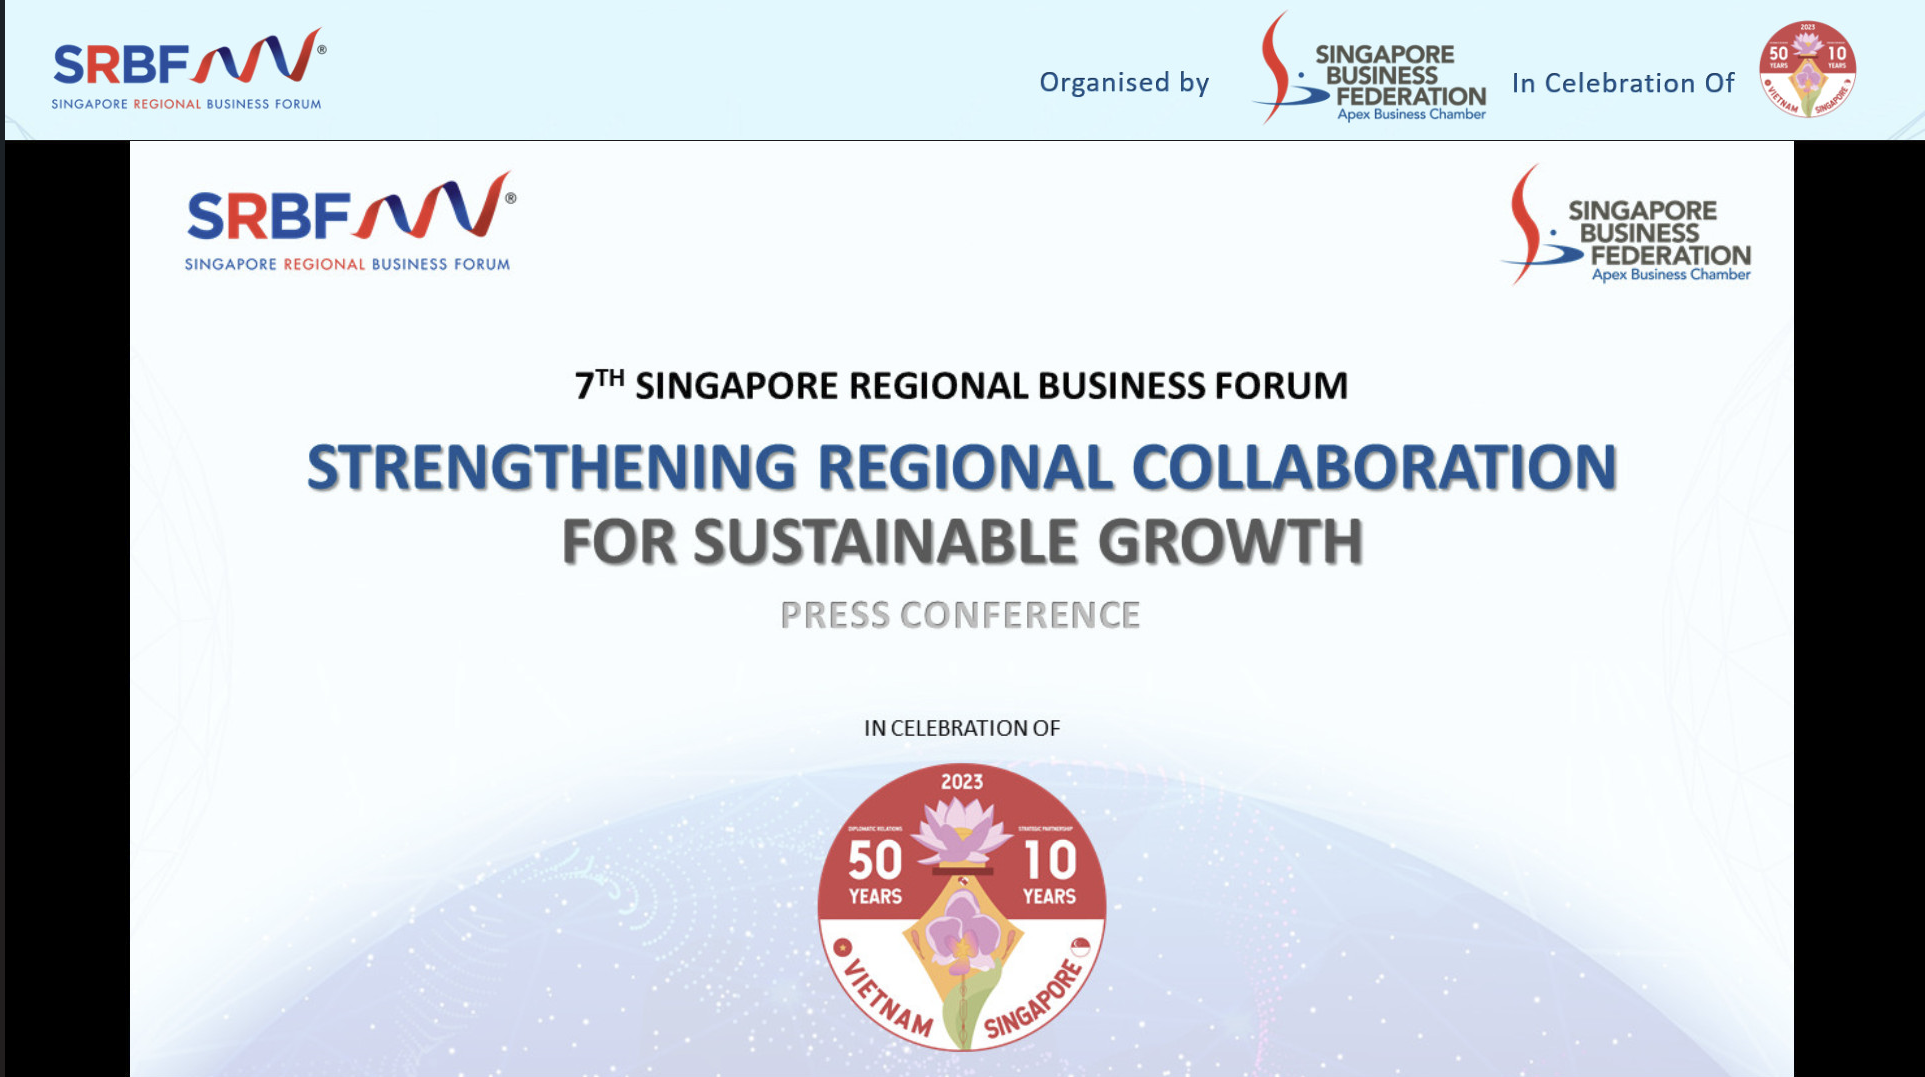 Oud Vietnam Attends SRBF® 2023: Strengthening Regional Cooperation for Sustainable Growth